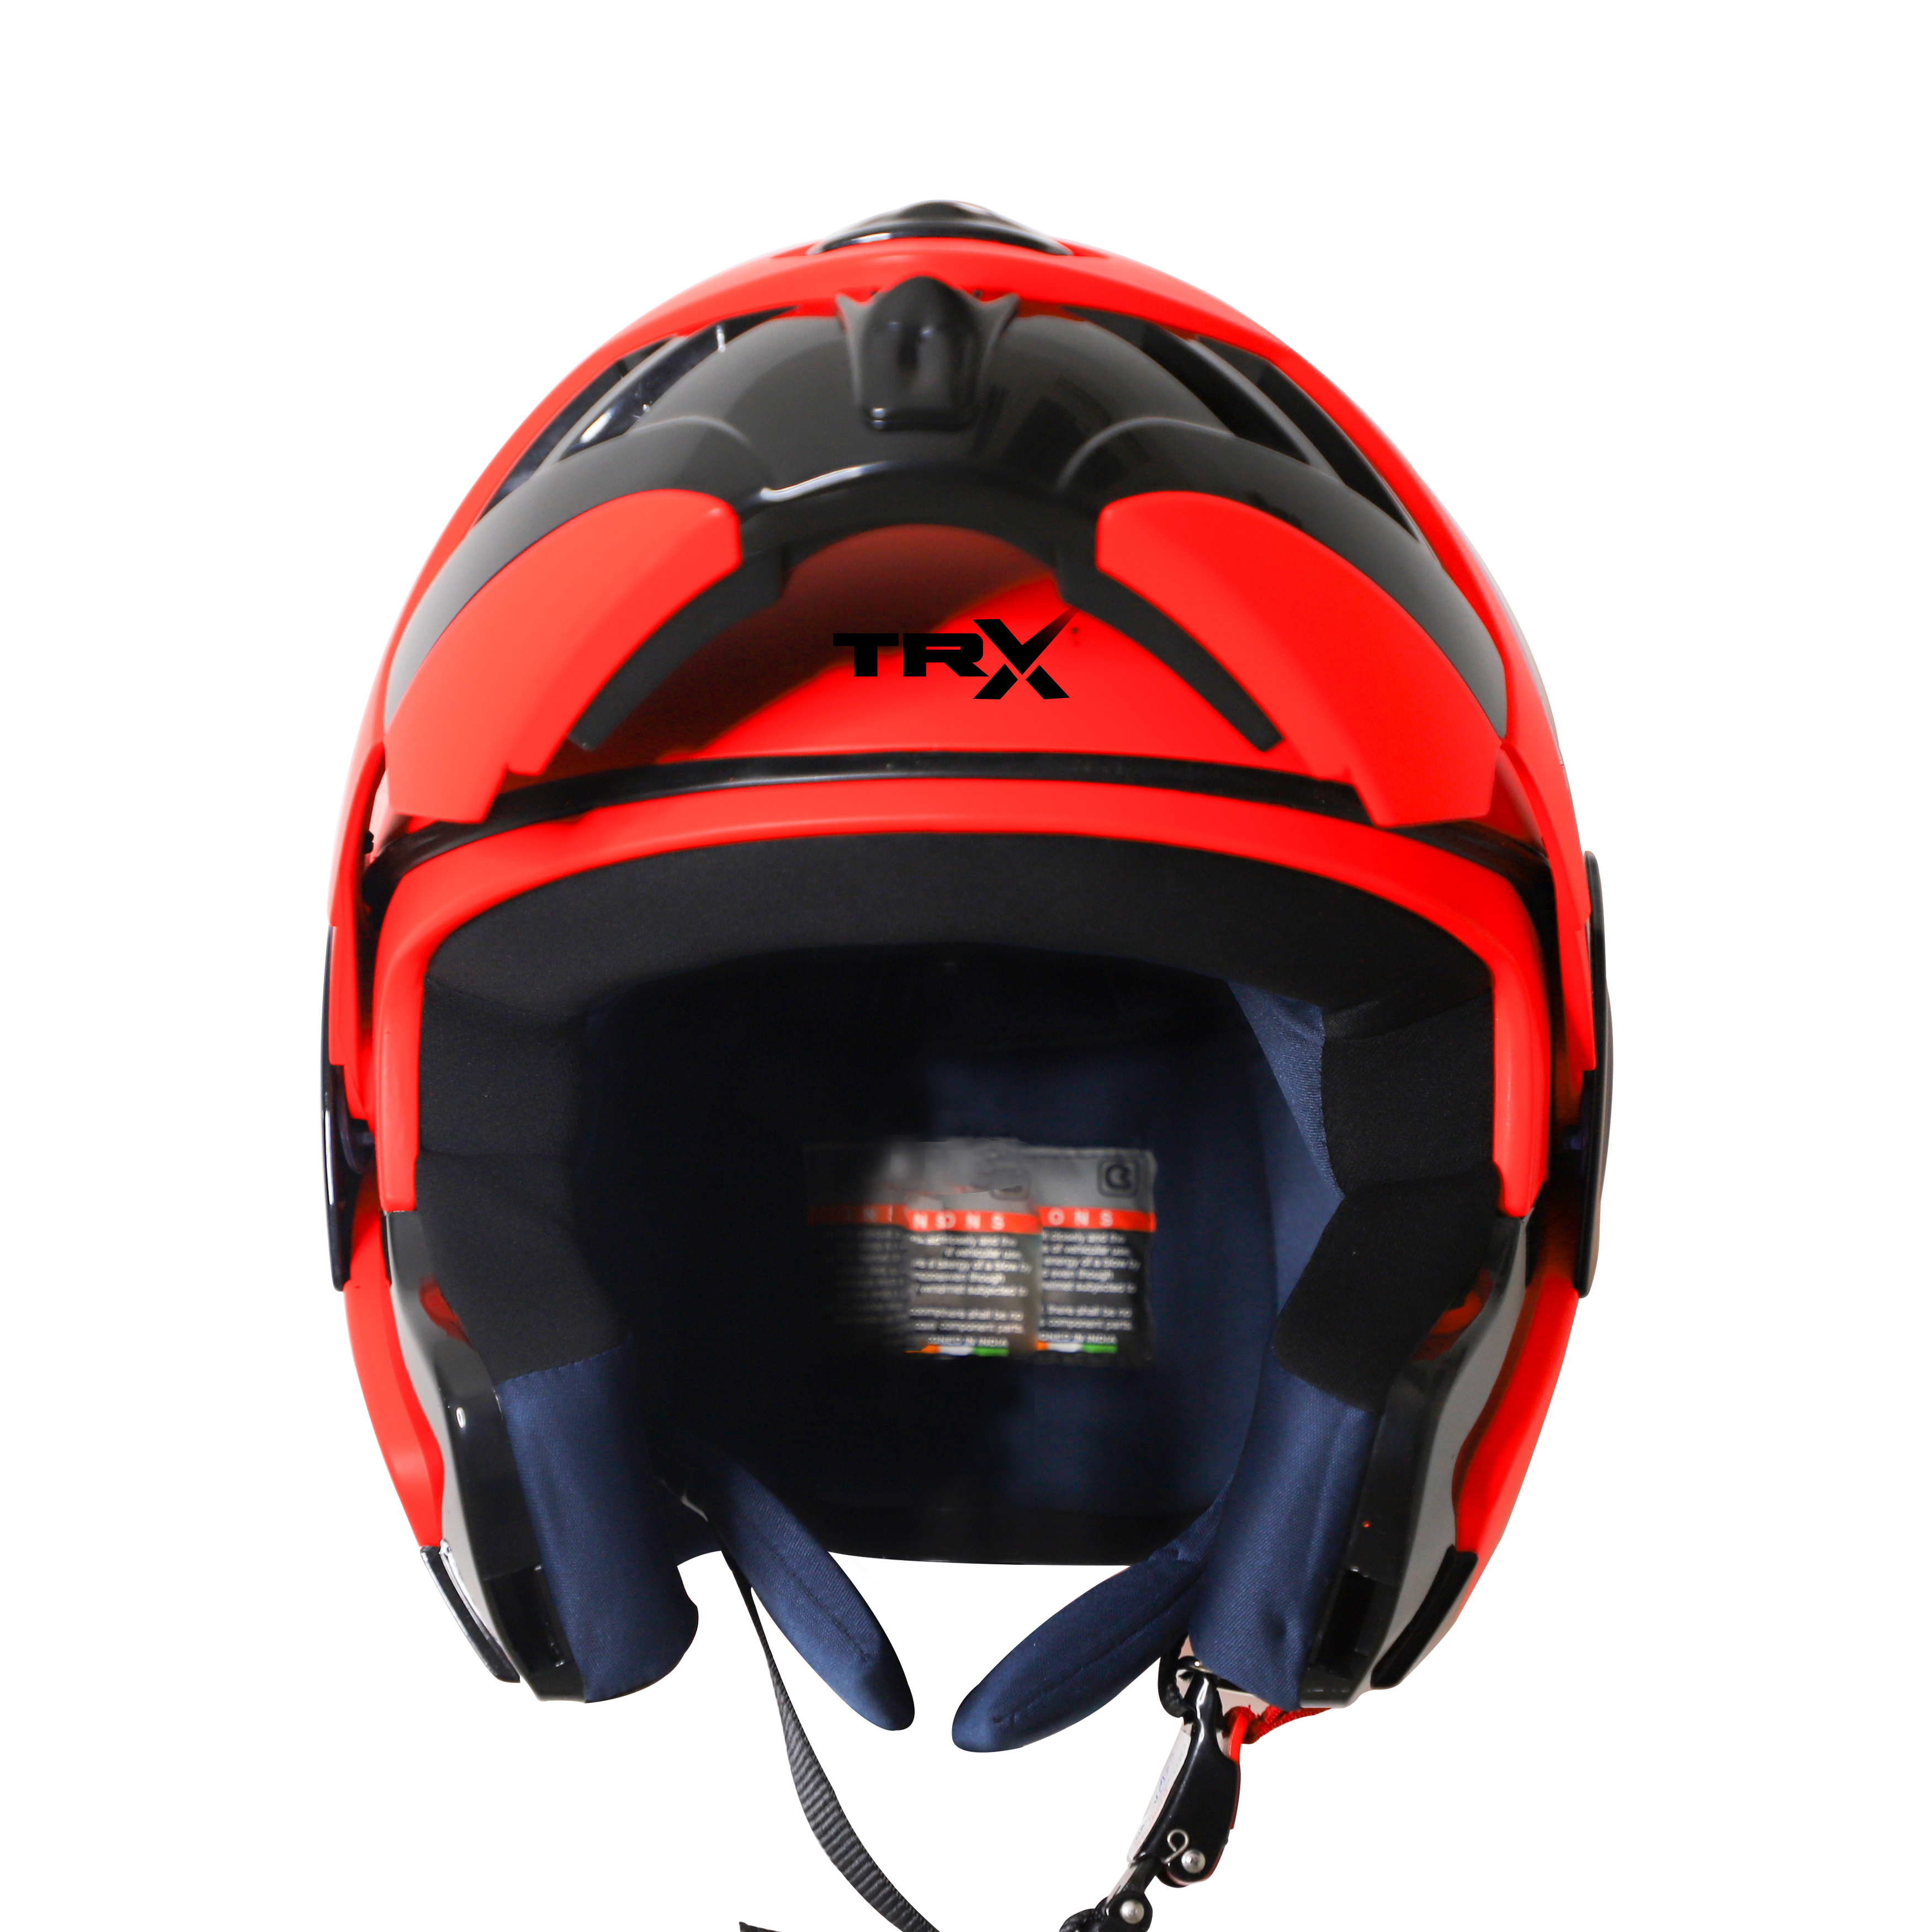 Steelbird SB-34 ISI Certified Flip-Up Helmet For Men And Women (Glossy Fluo Red With Smoke Visor)